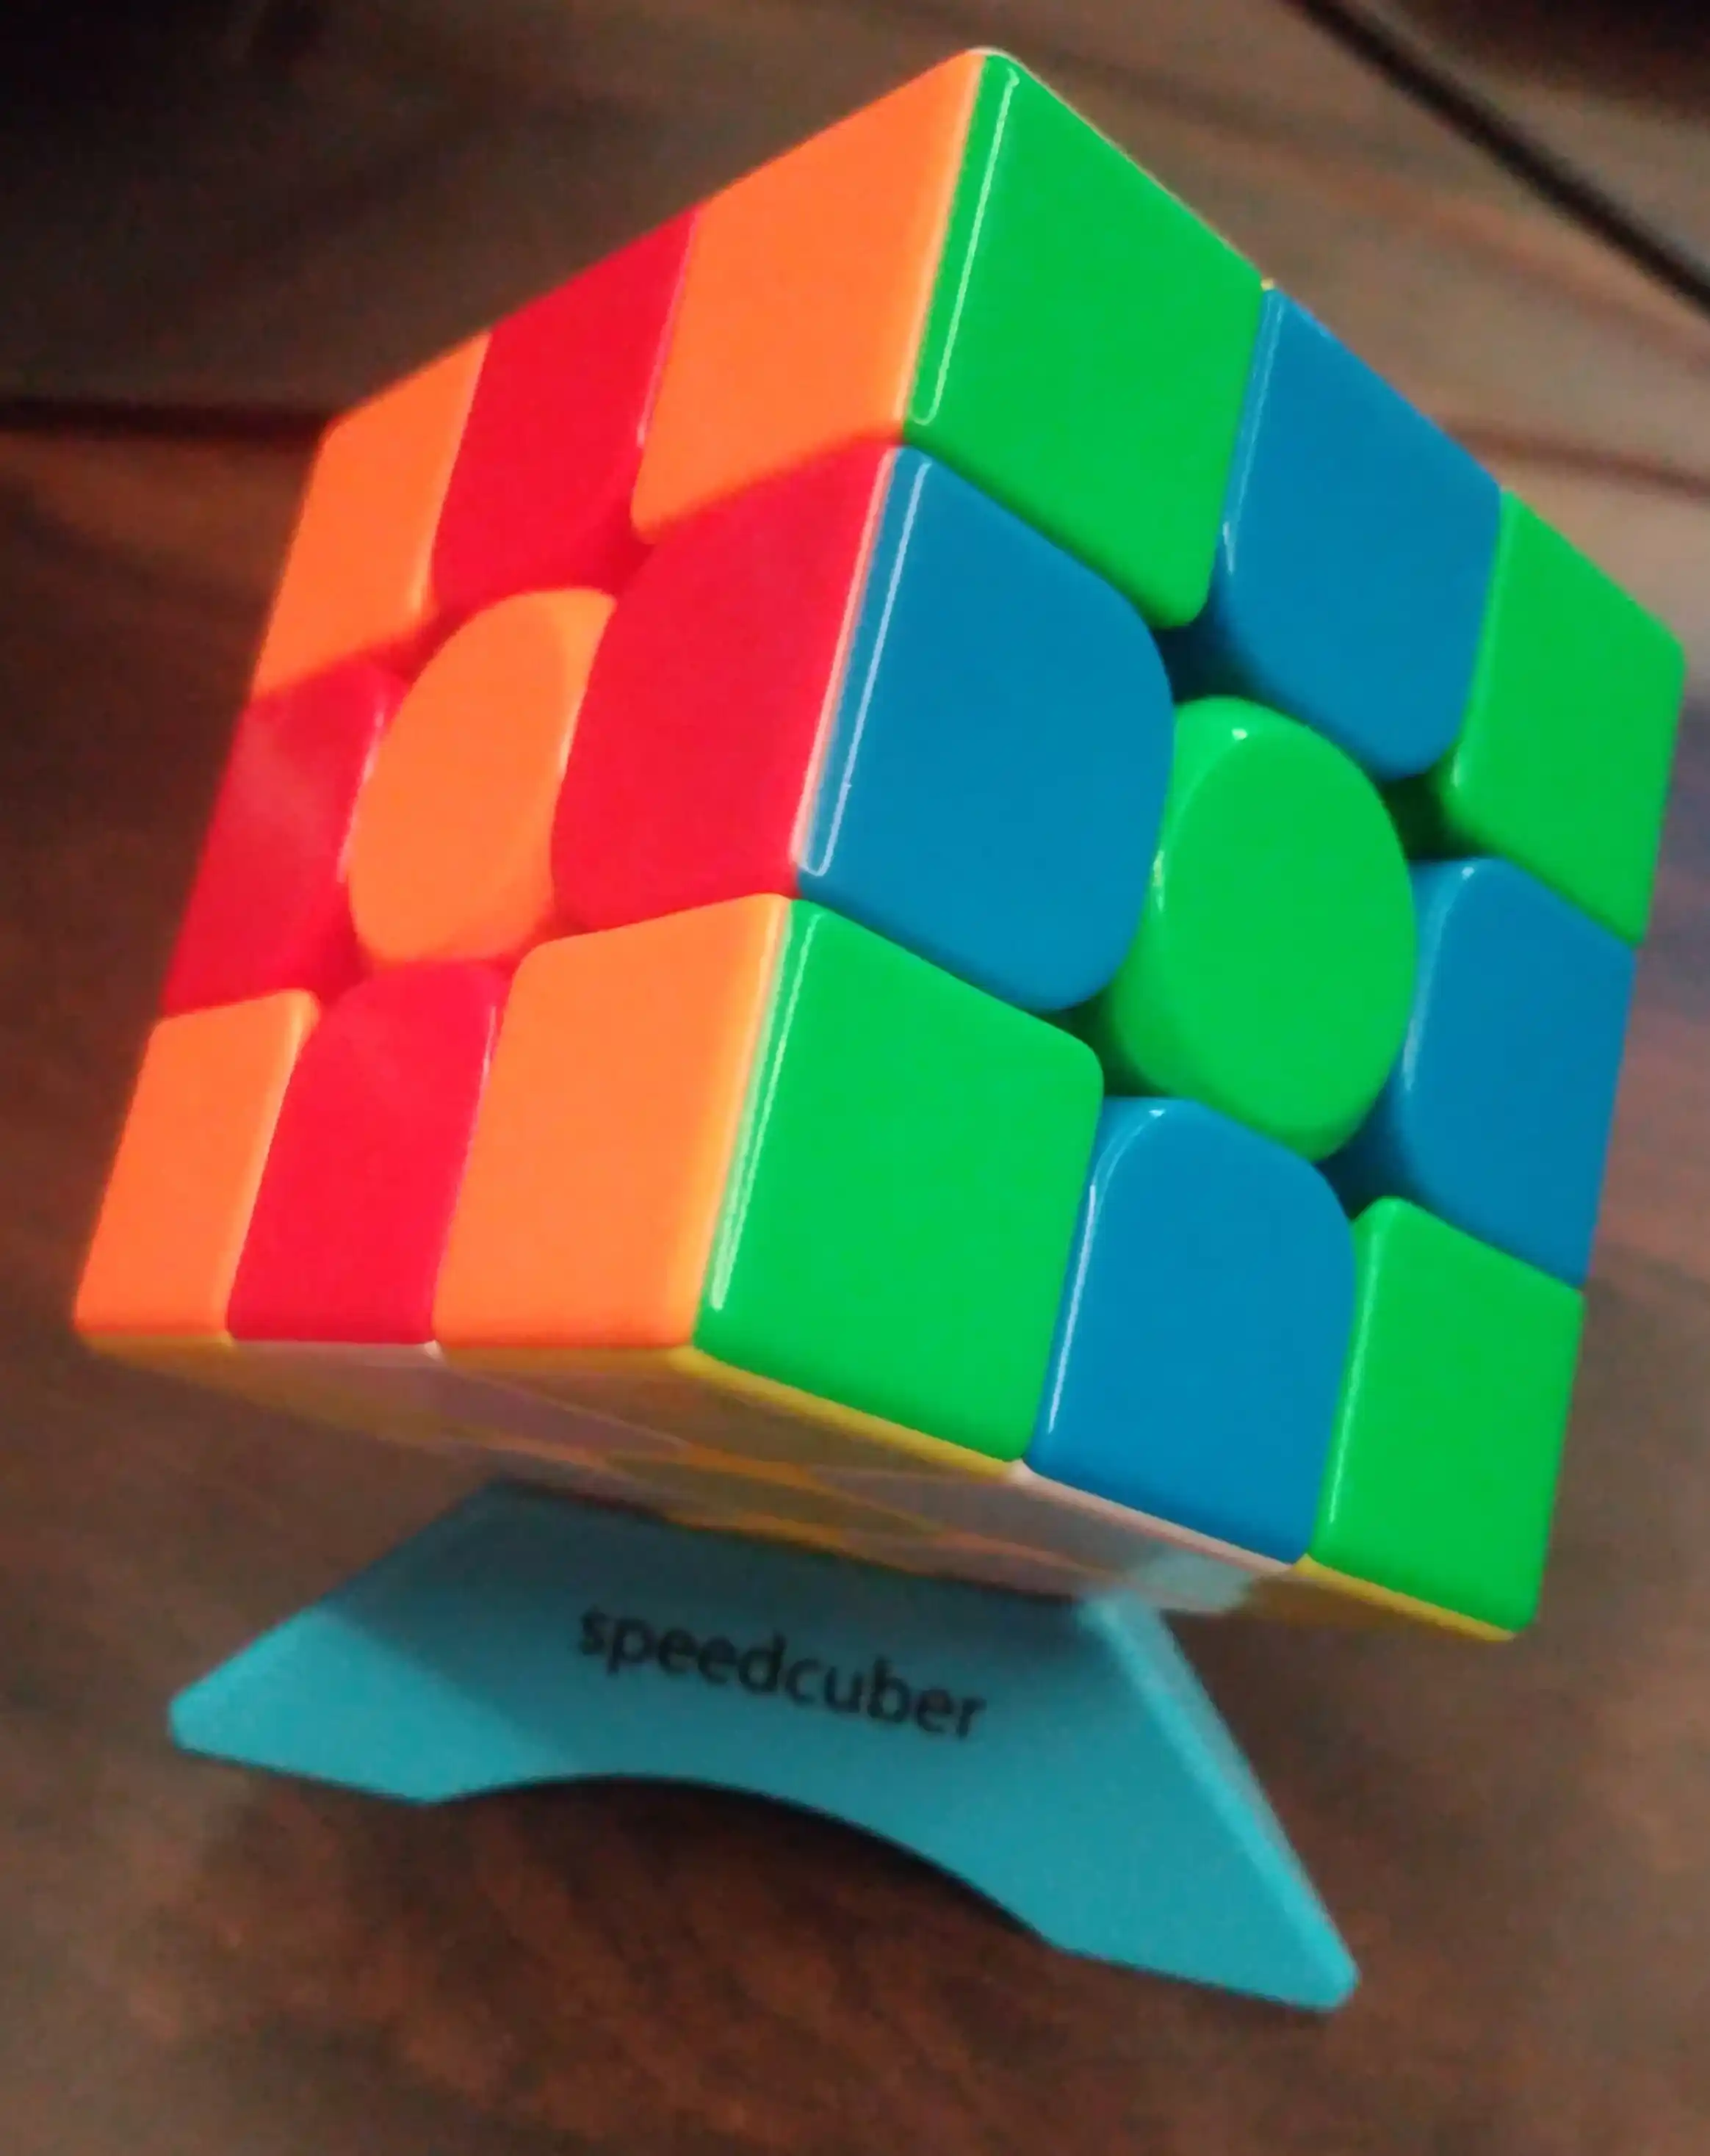 Alternating colors pattern on a 3x3 cube